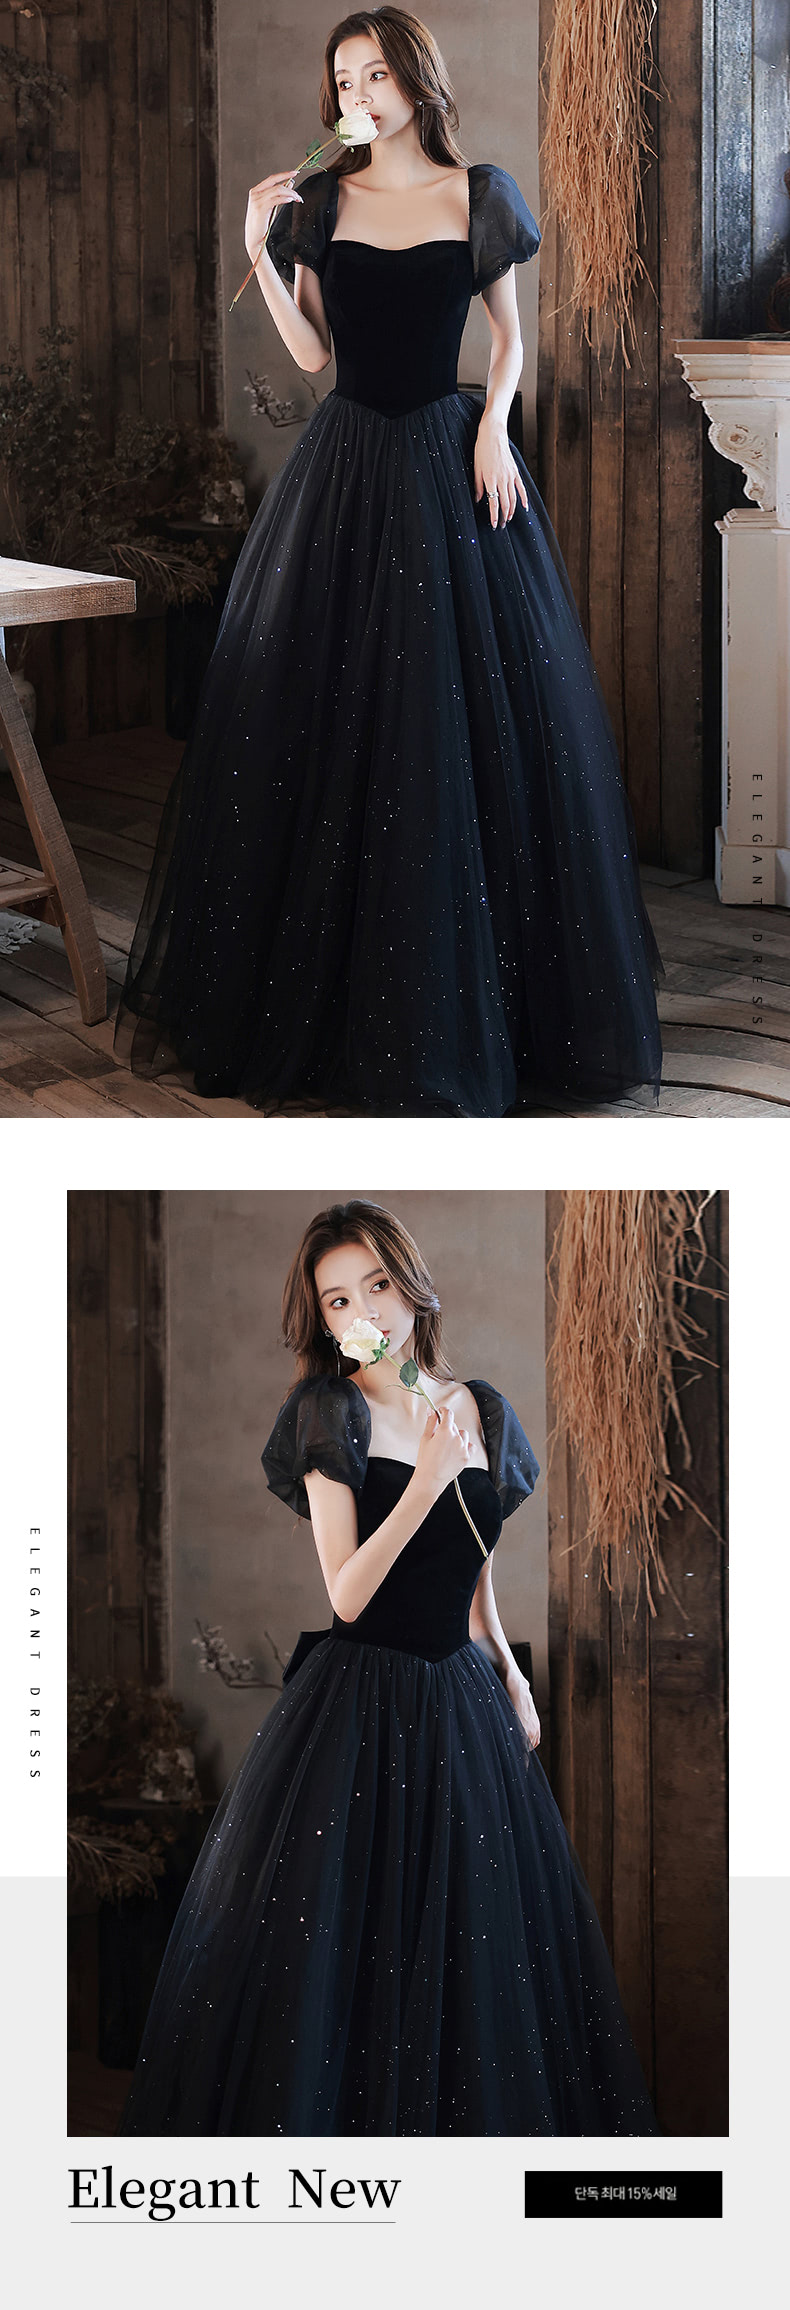 Black-Prom-Evening-Maxi-Dress-Homecoming-Outfit-with-Bowknot14.jpg